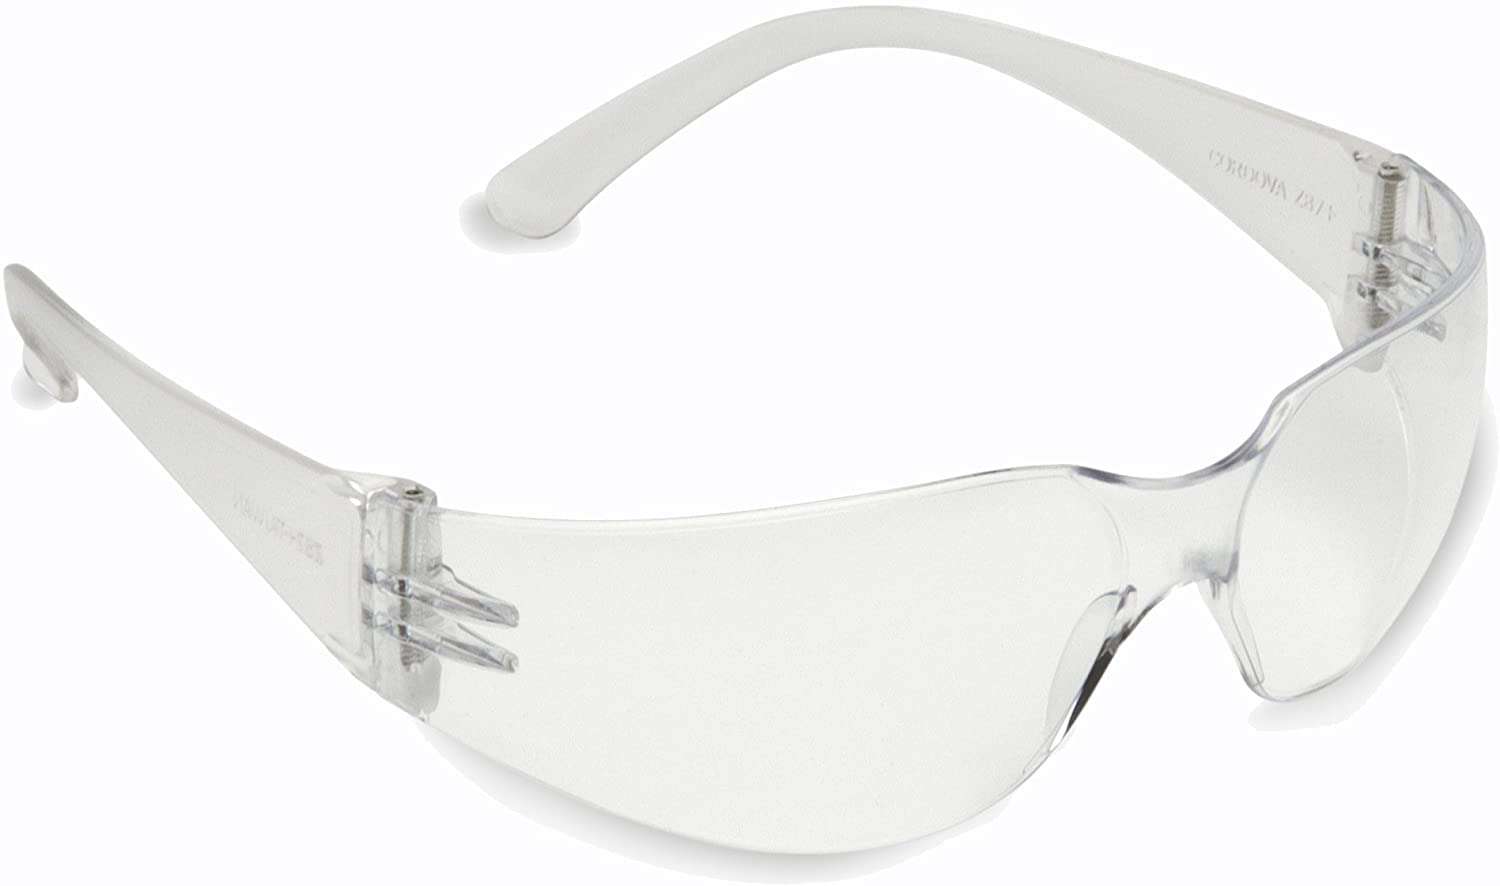 BULLDOG-LITE FROSTED CLEAR
FRAME, CLEAR LENS, UNCOATED
120PR/CASE Sold per PR